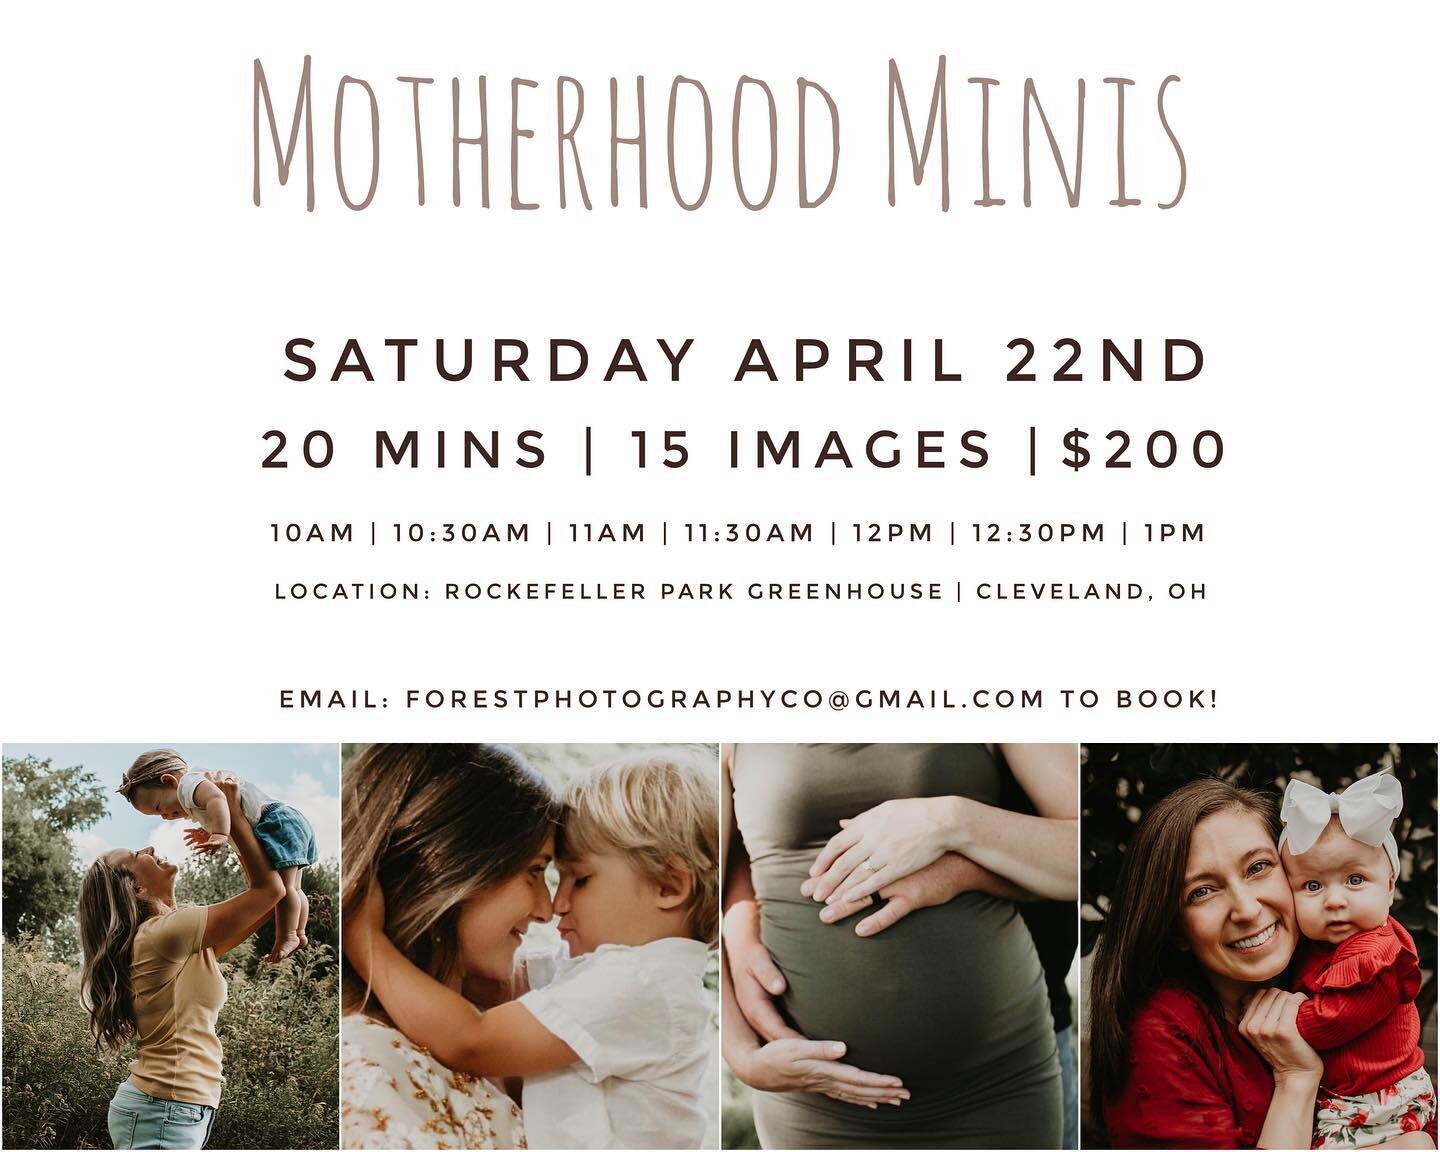 Motherhood Minis!! 
Email me to book!